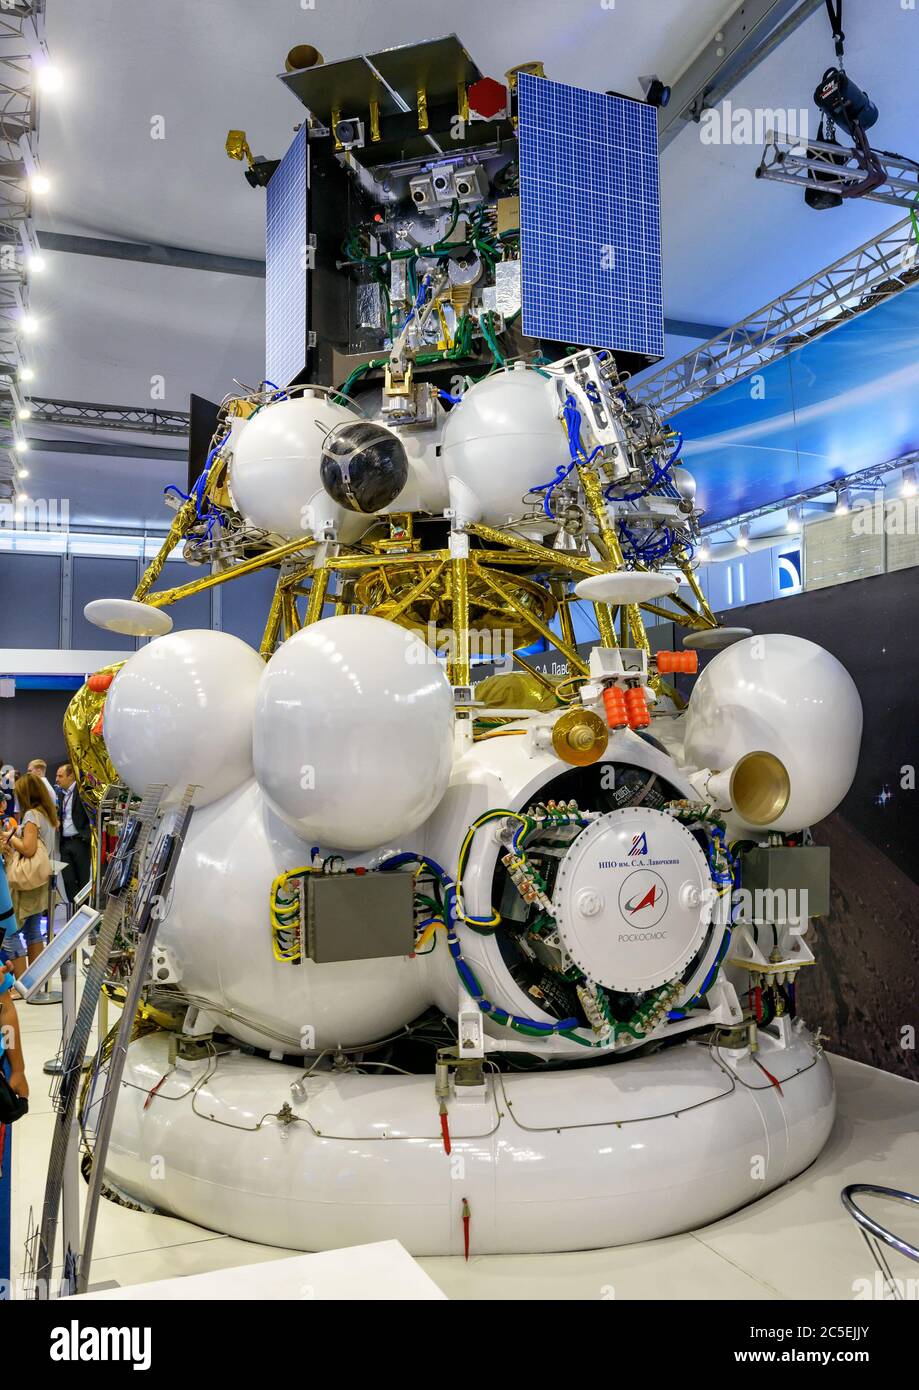 MOSCOW REGION - AUGUST 28, 2015: The Russian spacecraft Luna-Glob mission to the moon at the International Aviation and Space Salon (MAKS) in Zhukovsk Stock Photo